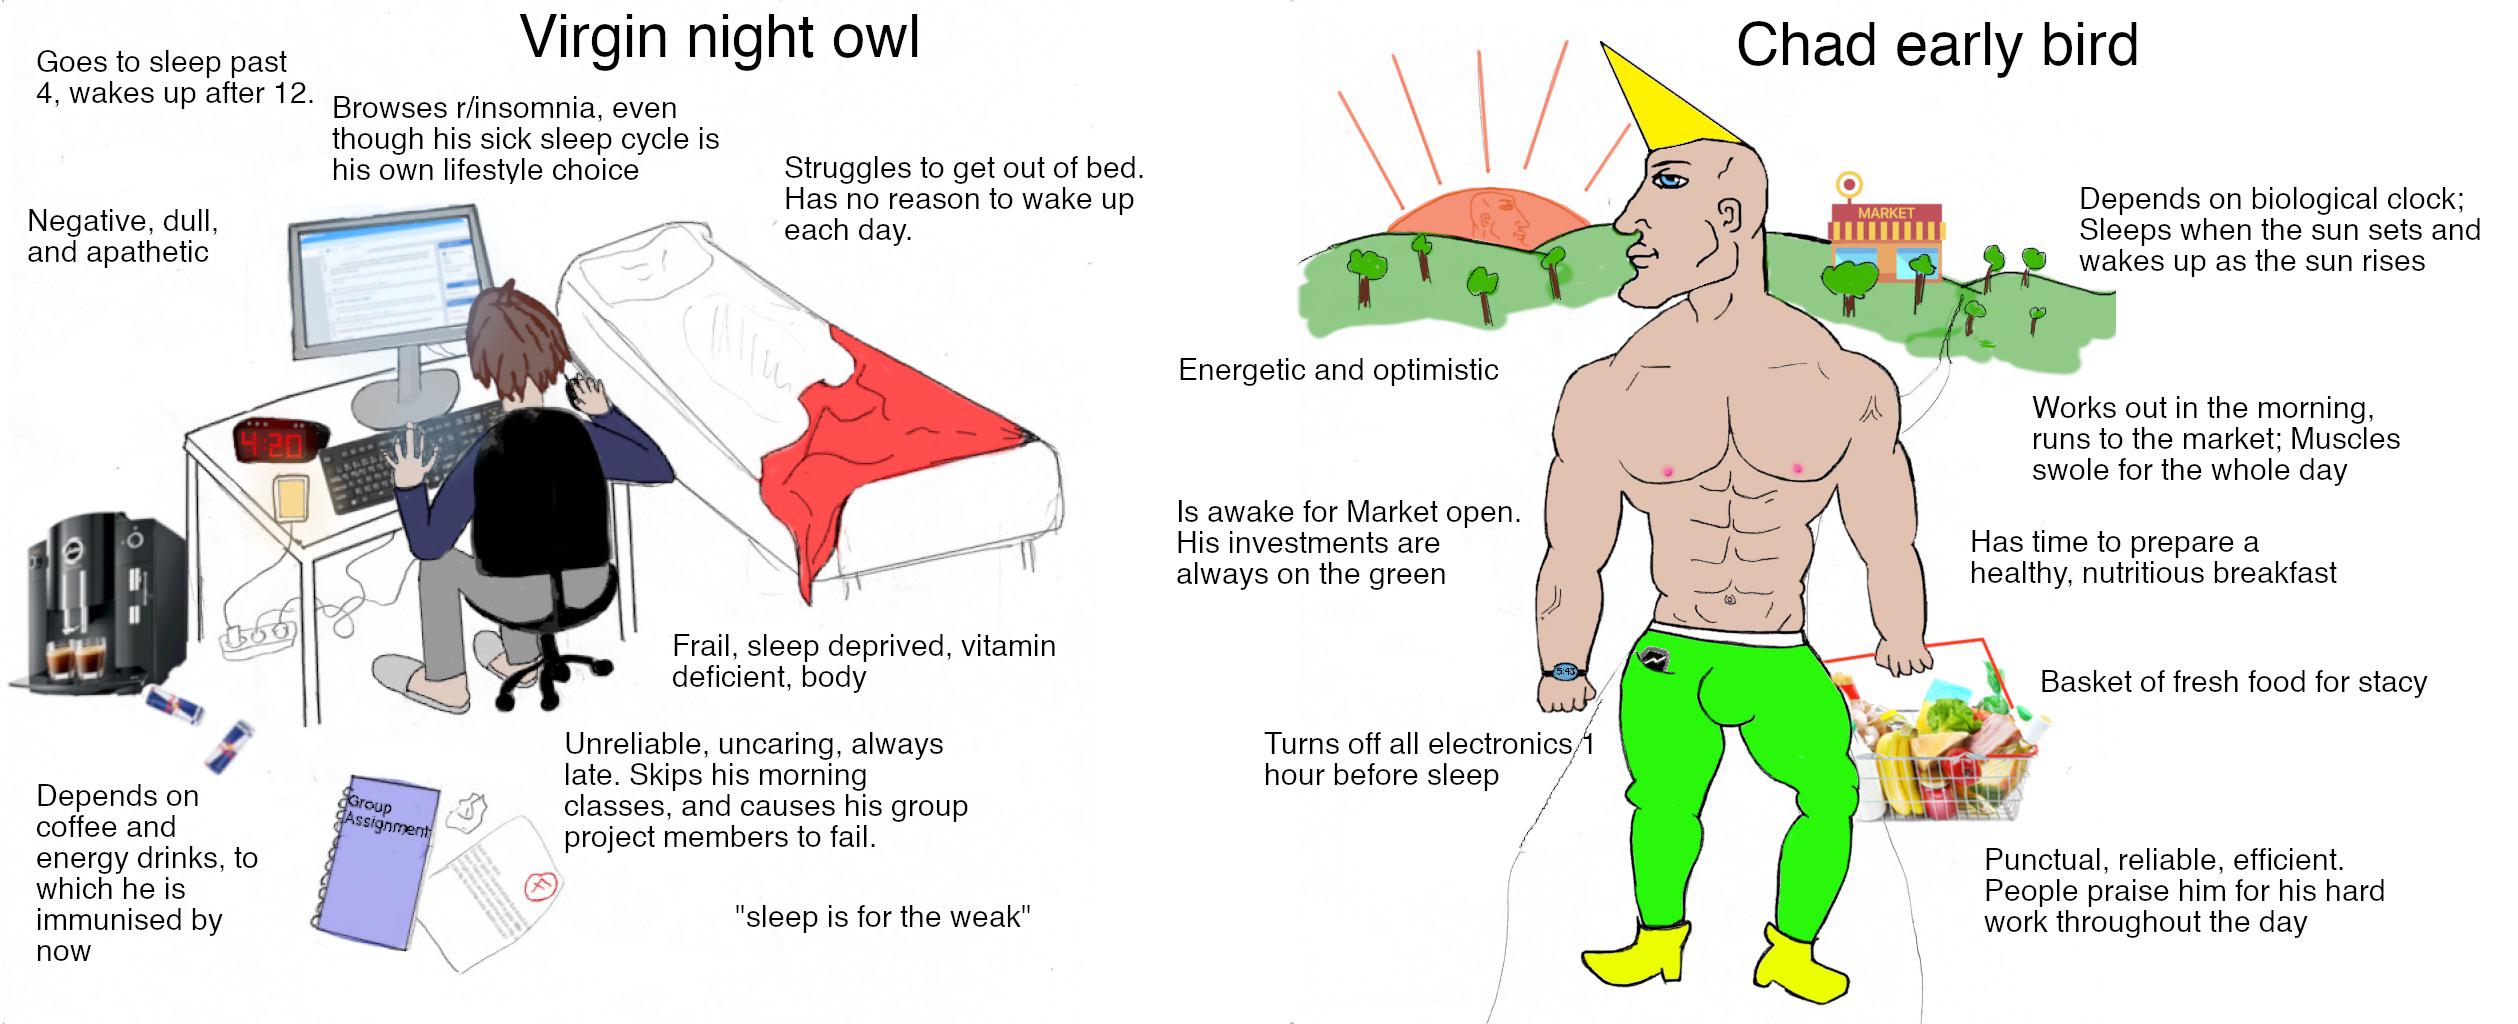 A "Virgin Vs. Chad" meme depicting a successful early riser in contrast with an underachieving night owl